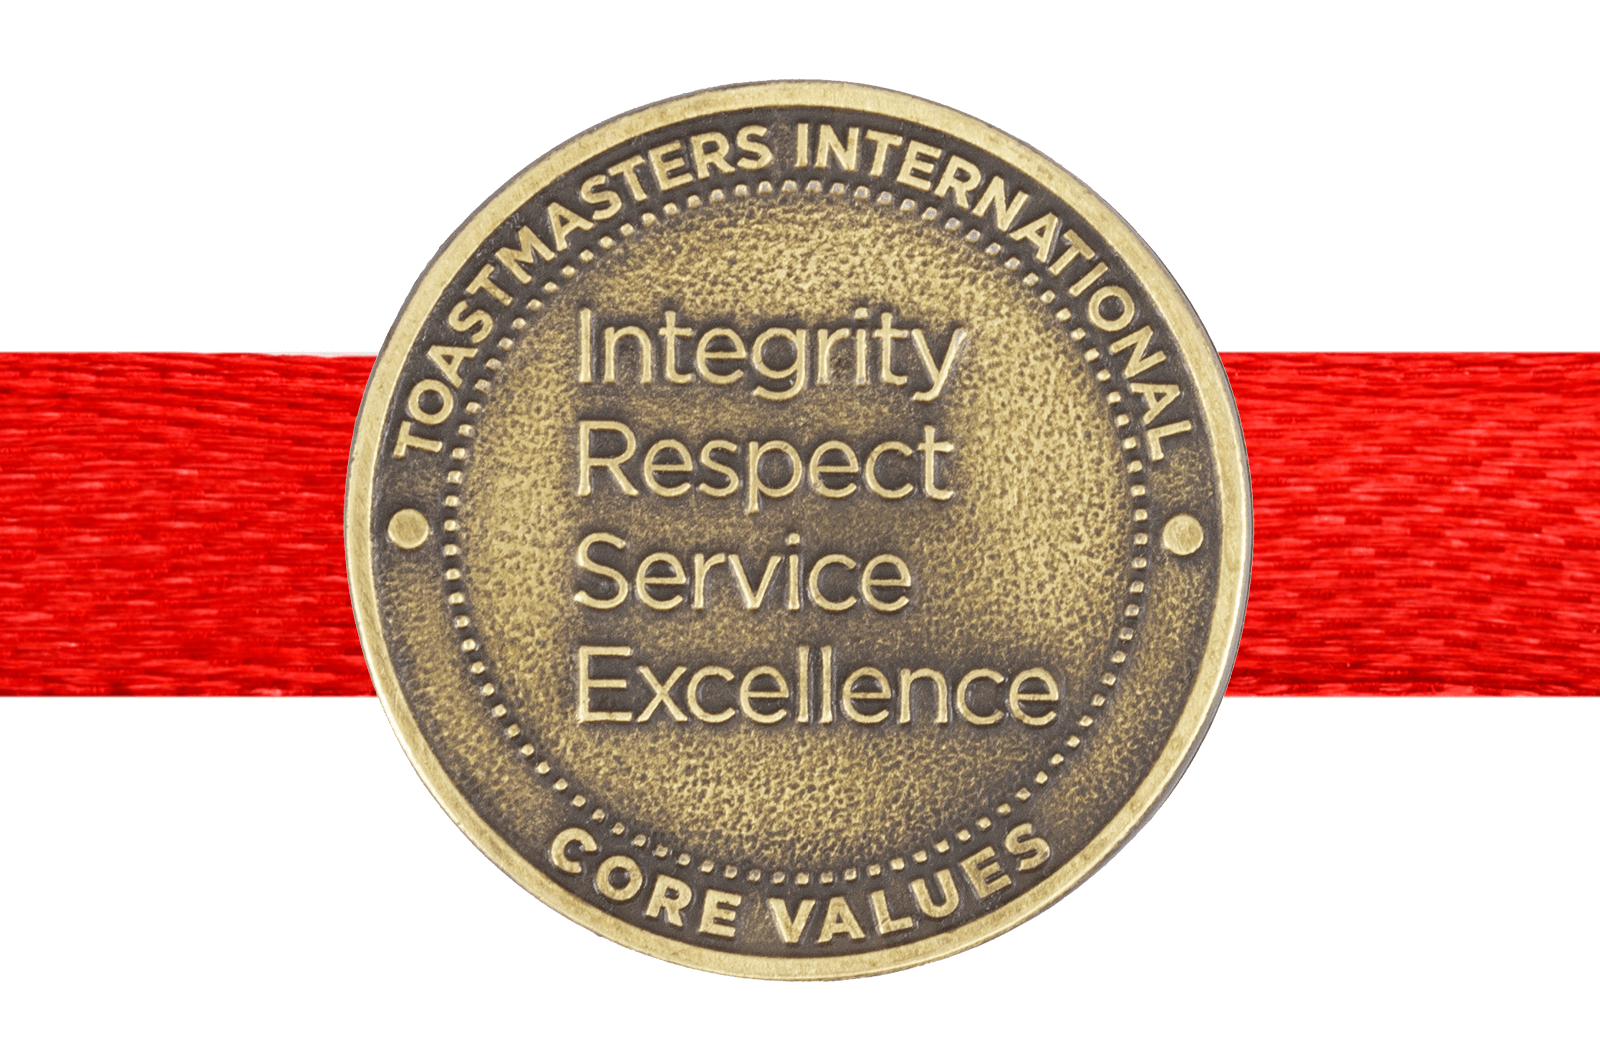 Gold coin with Toastmasters International’s core values